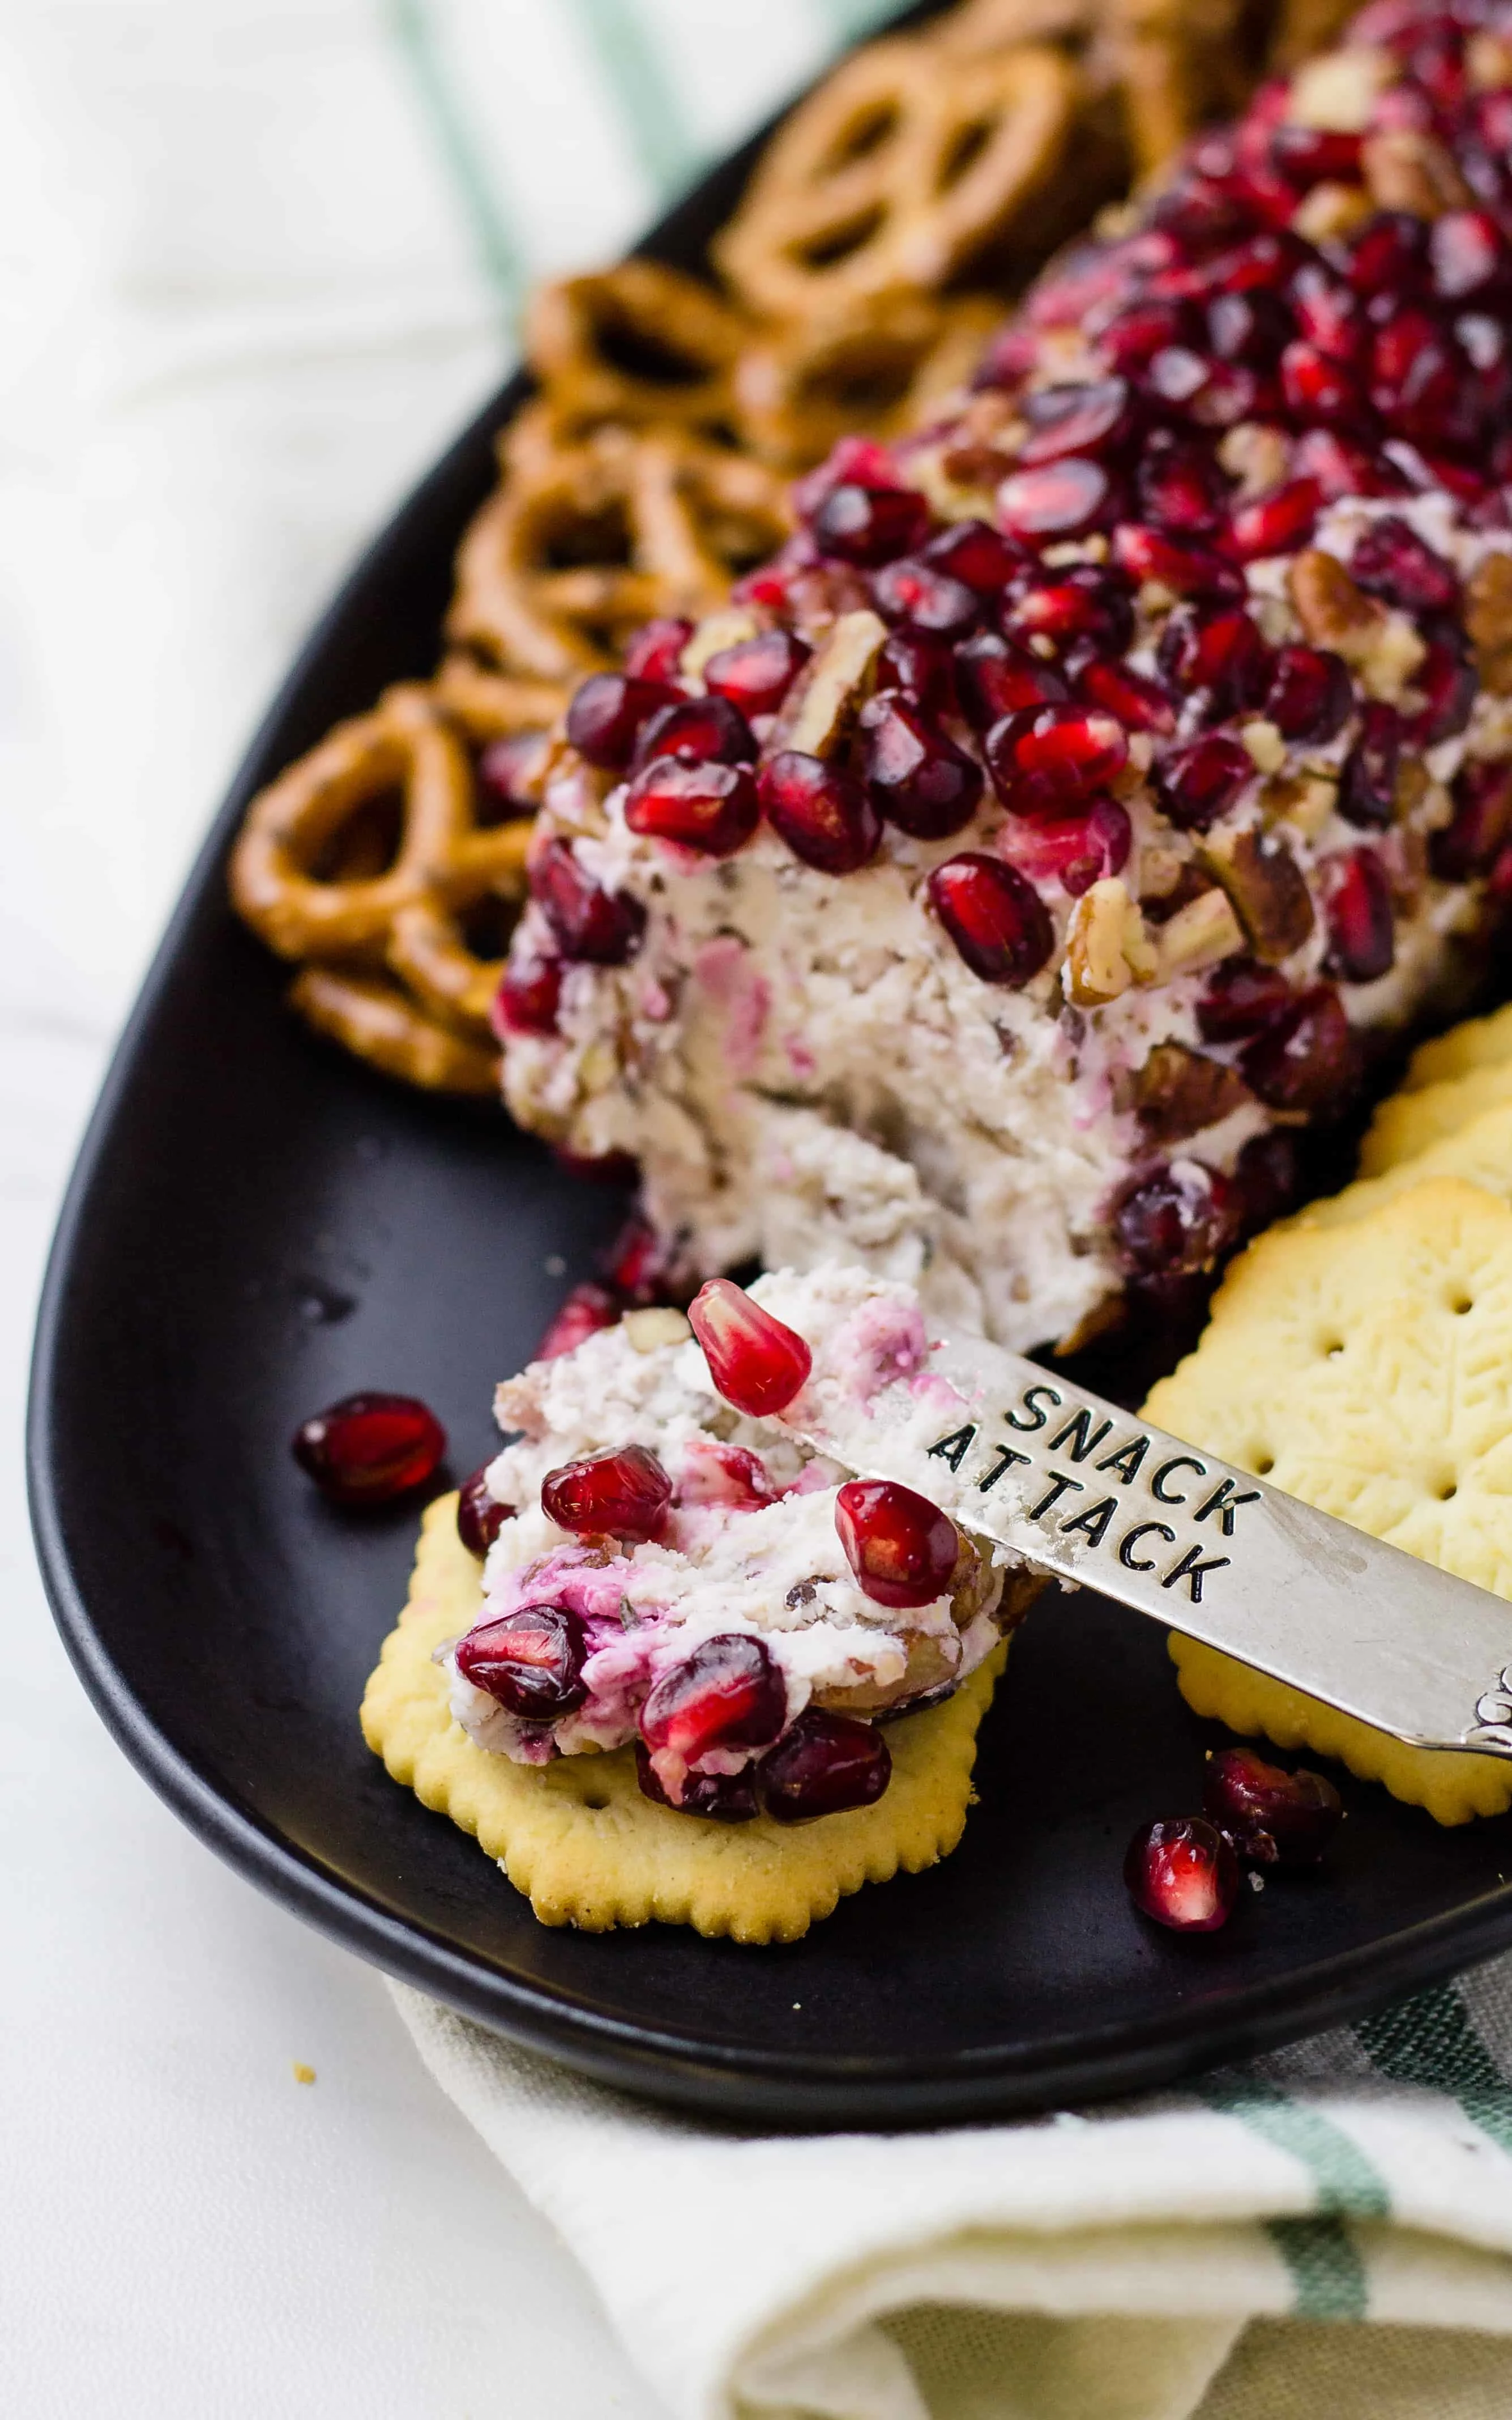 A cracker recently spread with the Drunken pomegranate goat cheese log